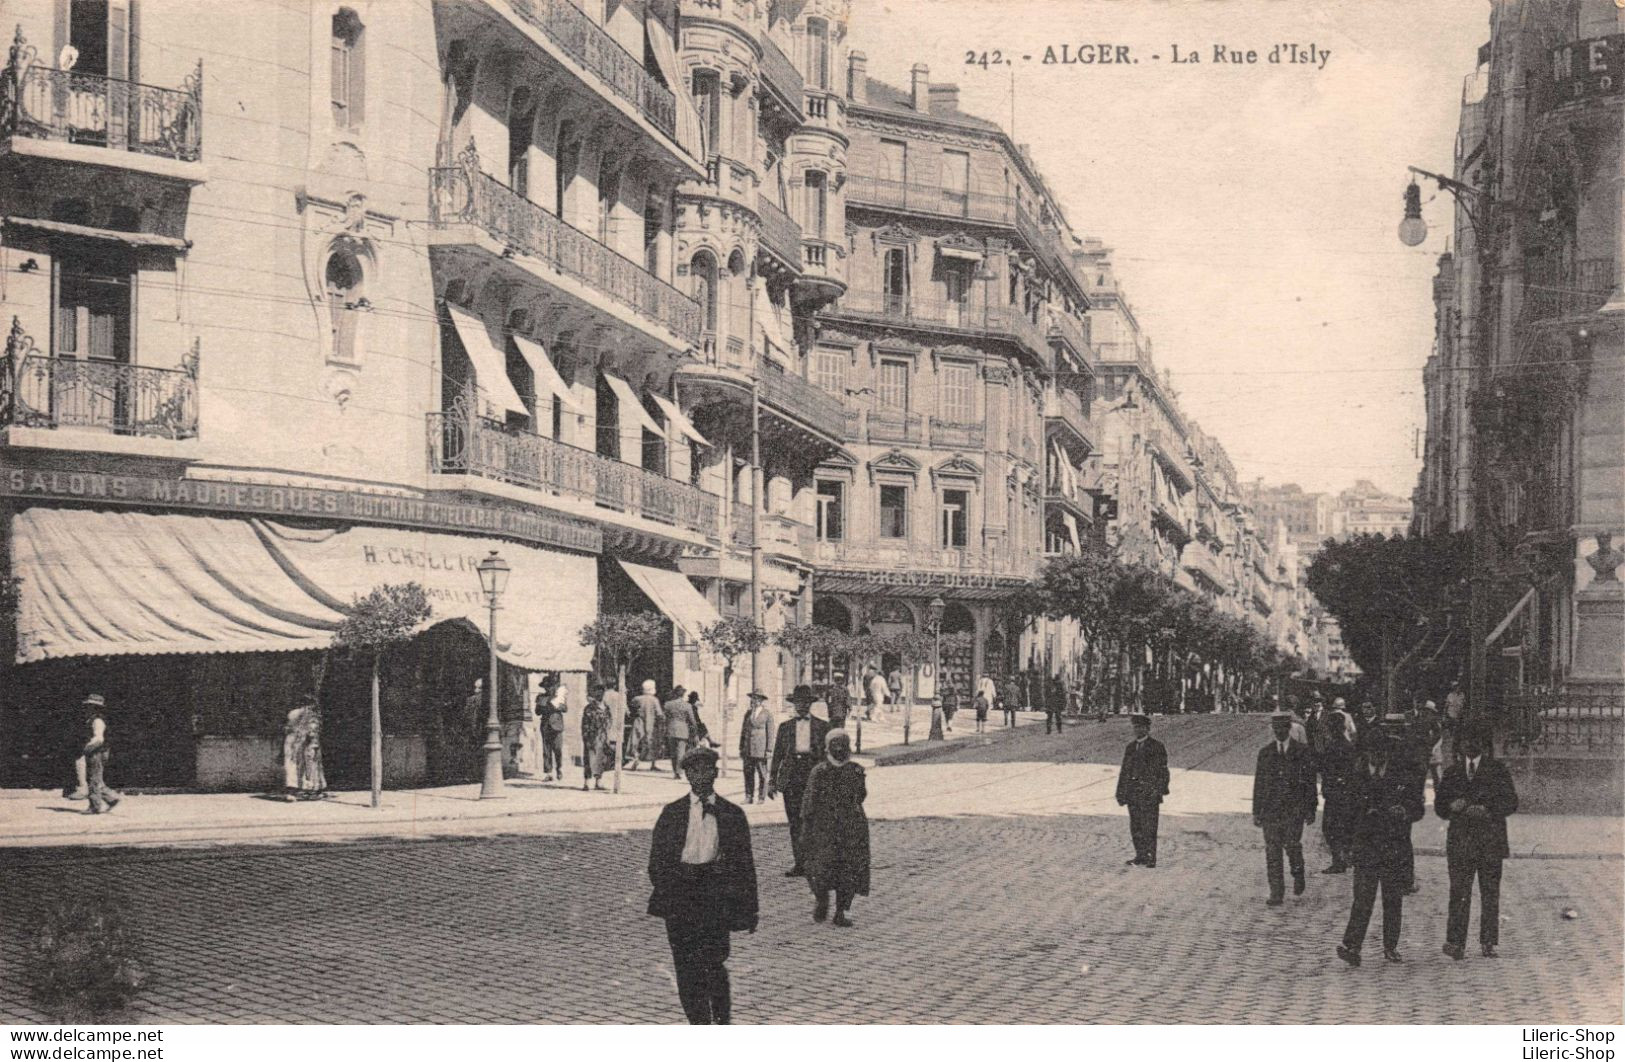 ALGER  Rue D'Isly  N° 242 Collection Idéale  Cpa ±1920 ♥♥♥ - Algiers